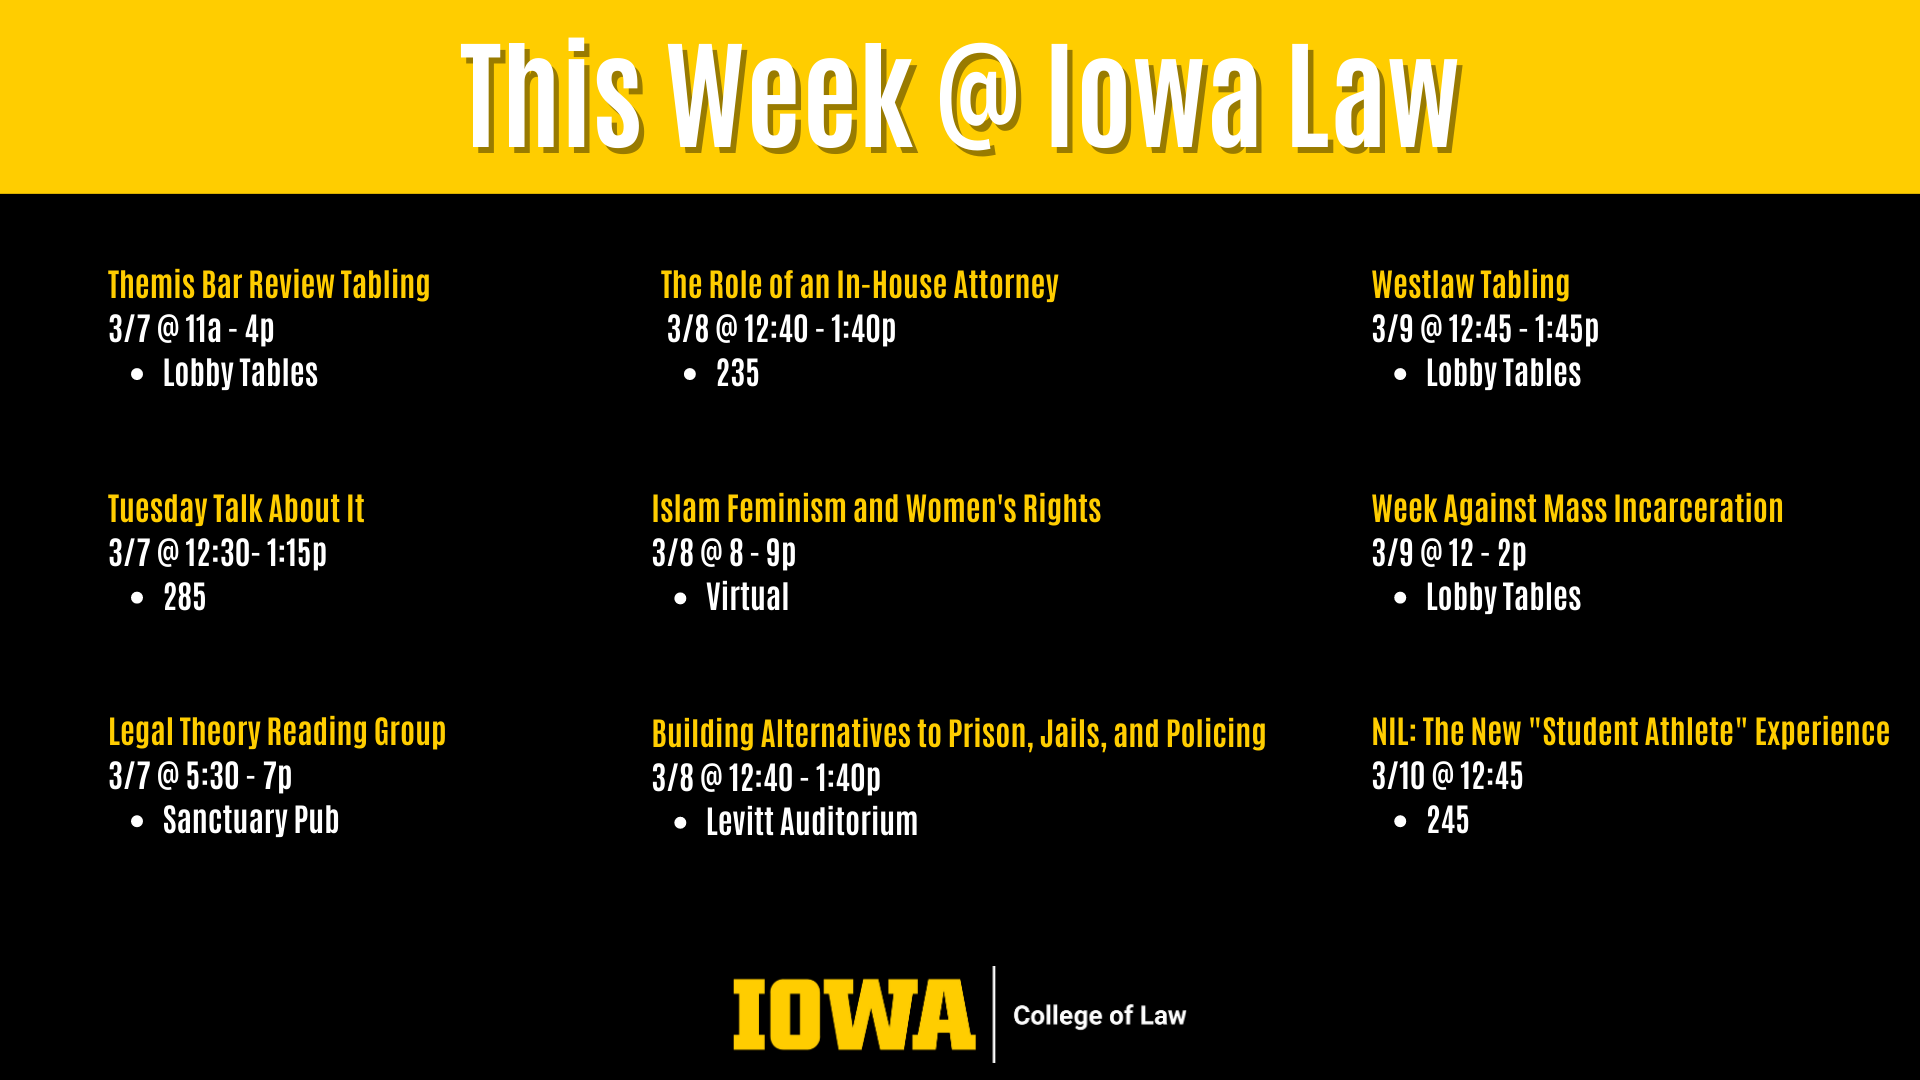 This Week @ Iowa Law Legal Theory Reading Group 3/7 @ 5:30 - 7p  Sanctuary Pub Westlaw Tabling  3/9 @ 12:45 - 1:45p  Lobby Tables Tuesday Talk About It 3/7 @ 12:30- 1:15p  285 Themis Bar Review Tabling 3/7 @ 11a - 4p  Lobby Tables The Role of an In-House Attorney  3/8 @ 12:40 - 1:40p  235 Islam Feminism and Women's Rights  3/8 @ 8 - 9p  Virtual Week Against Mass Incarceration  3/9 @ 12 - 2p  Lobby Tables NIL: The New "Student Athlete" Experience  3/10 @ 12:45 245 Building Alternatives to Prison, Jails, and Policing 3/8 @ 12:40 - 1:40p Levitt Auditorium